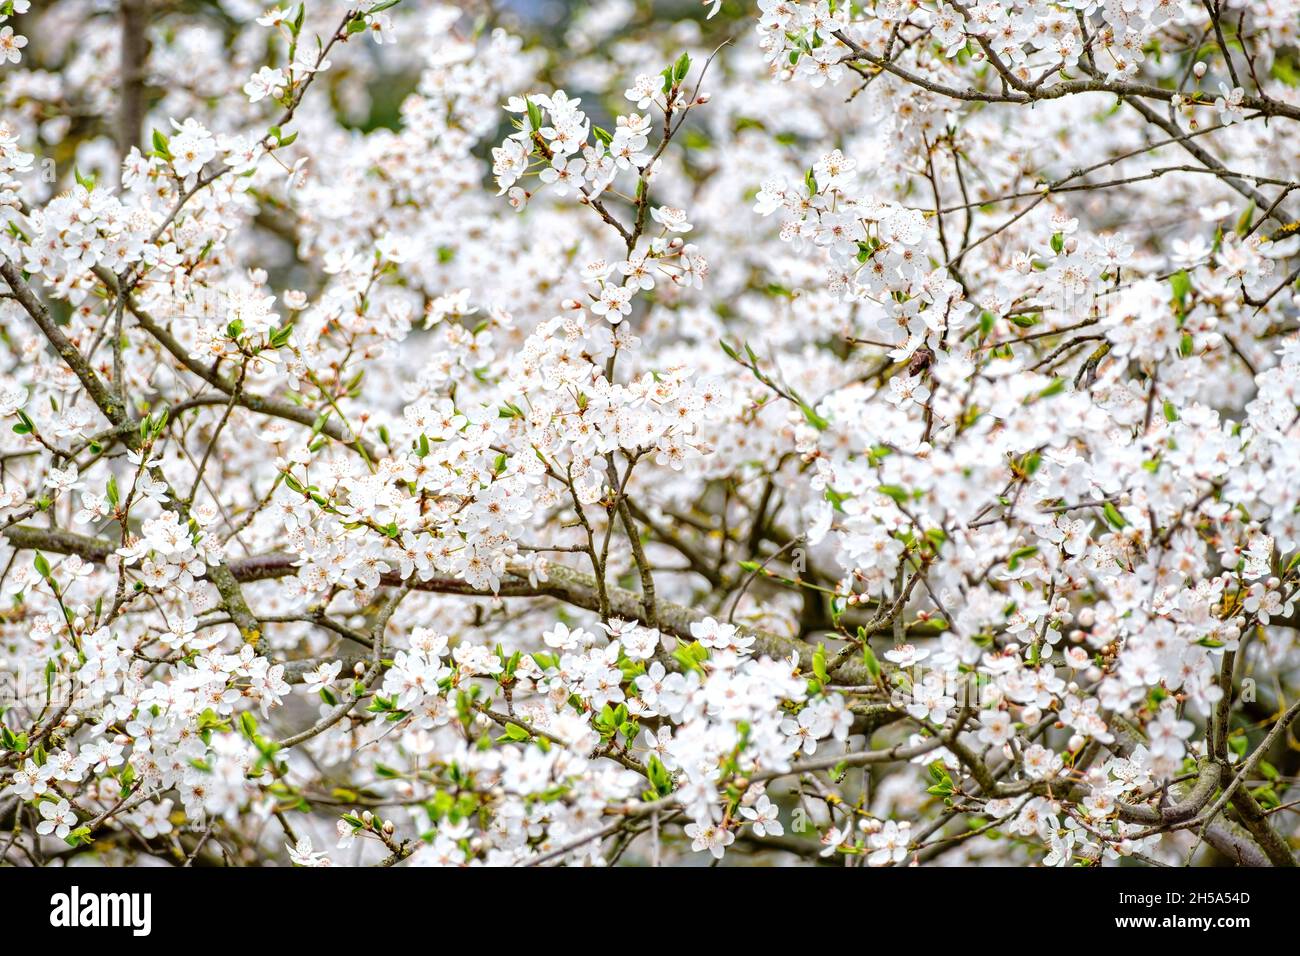 many little white flowers on blooming apple tree Stock Photo